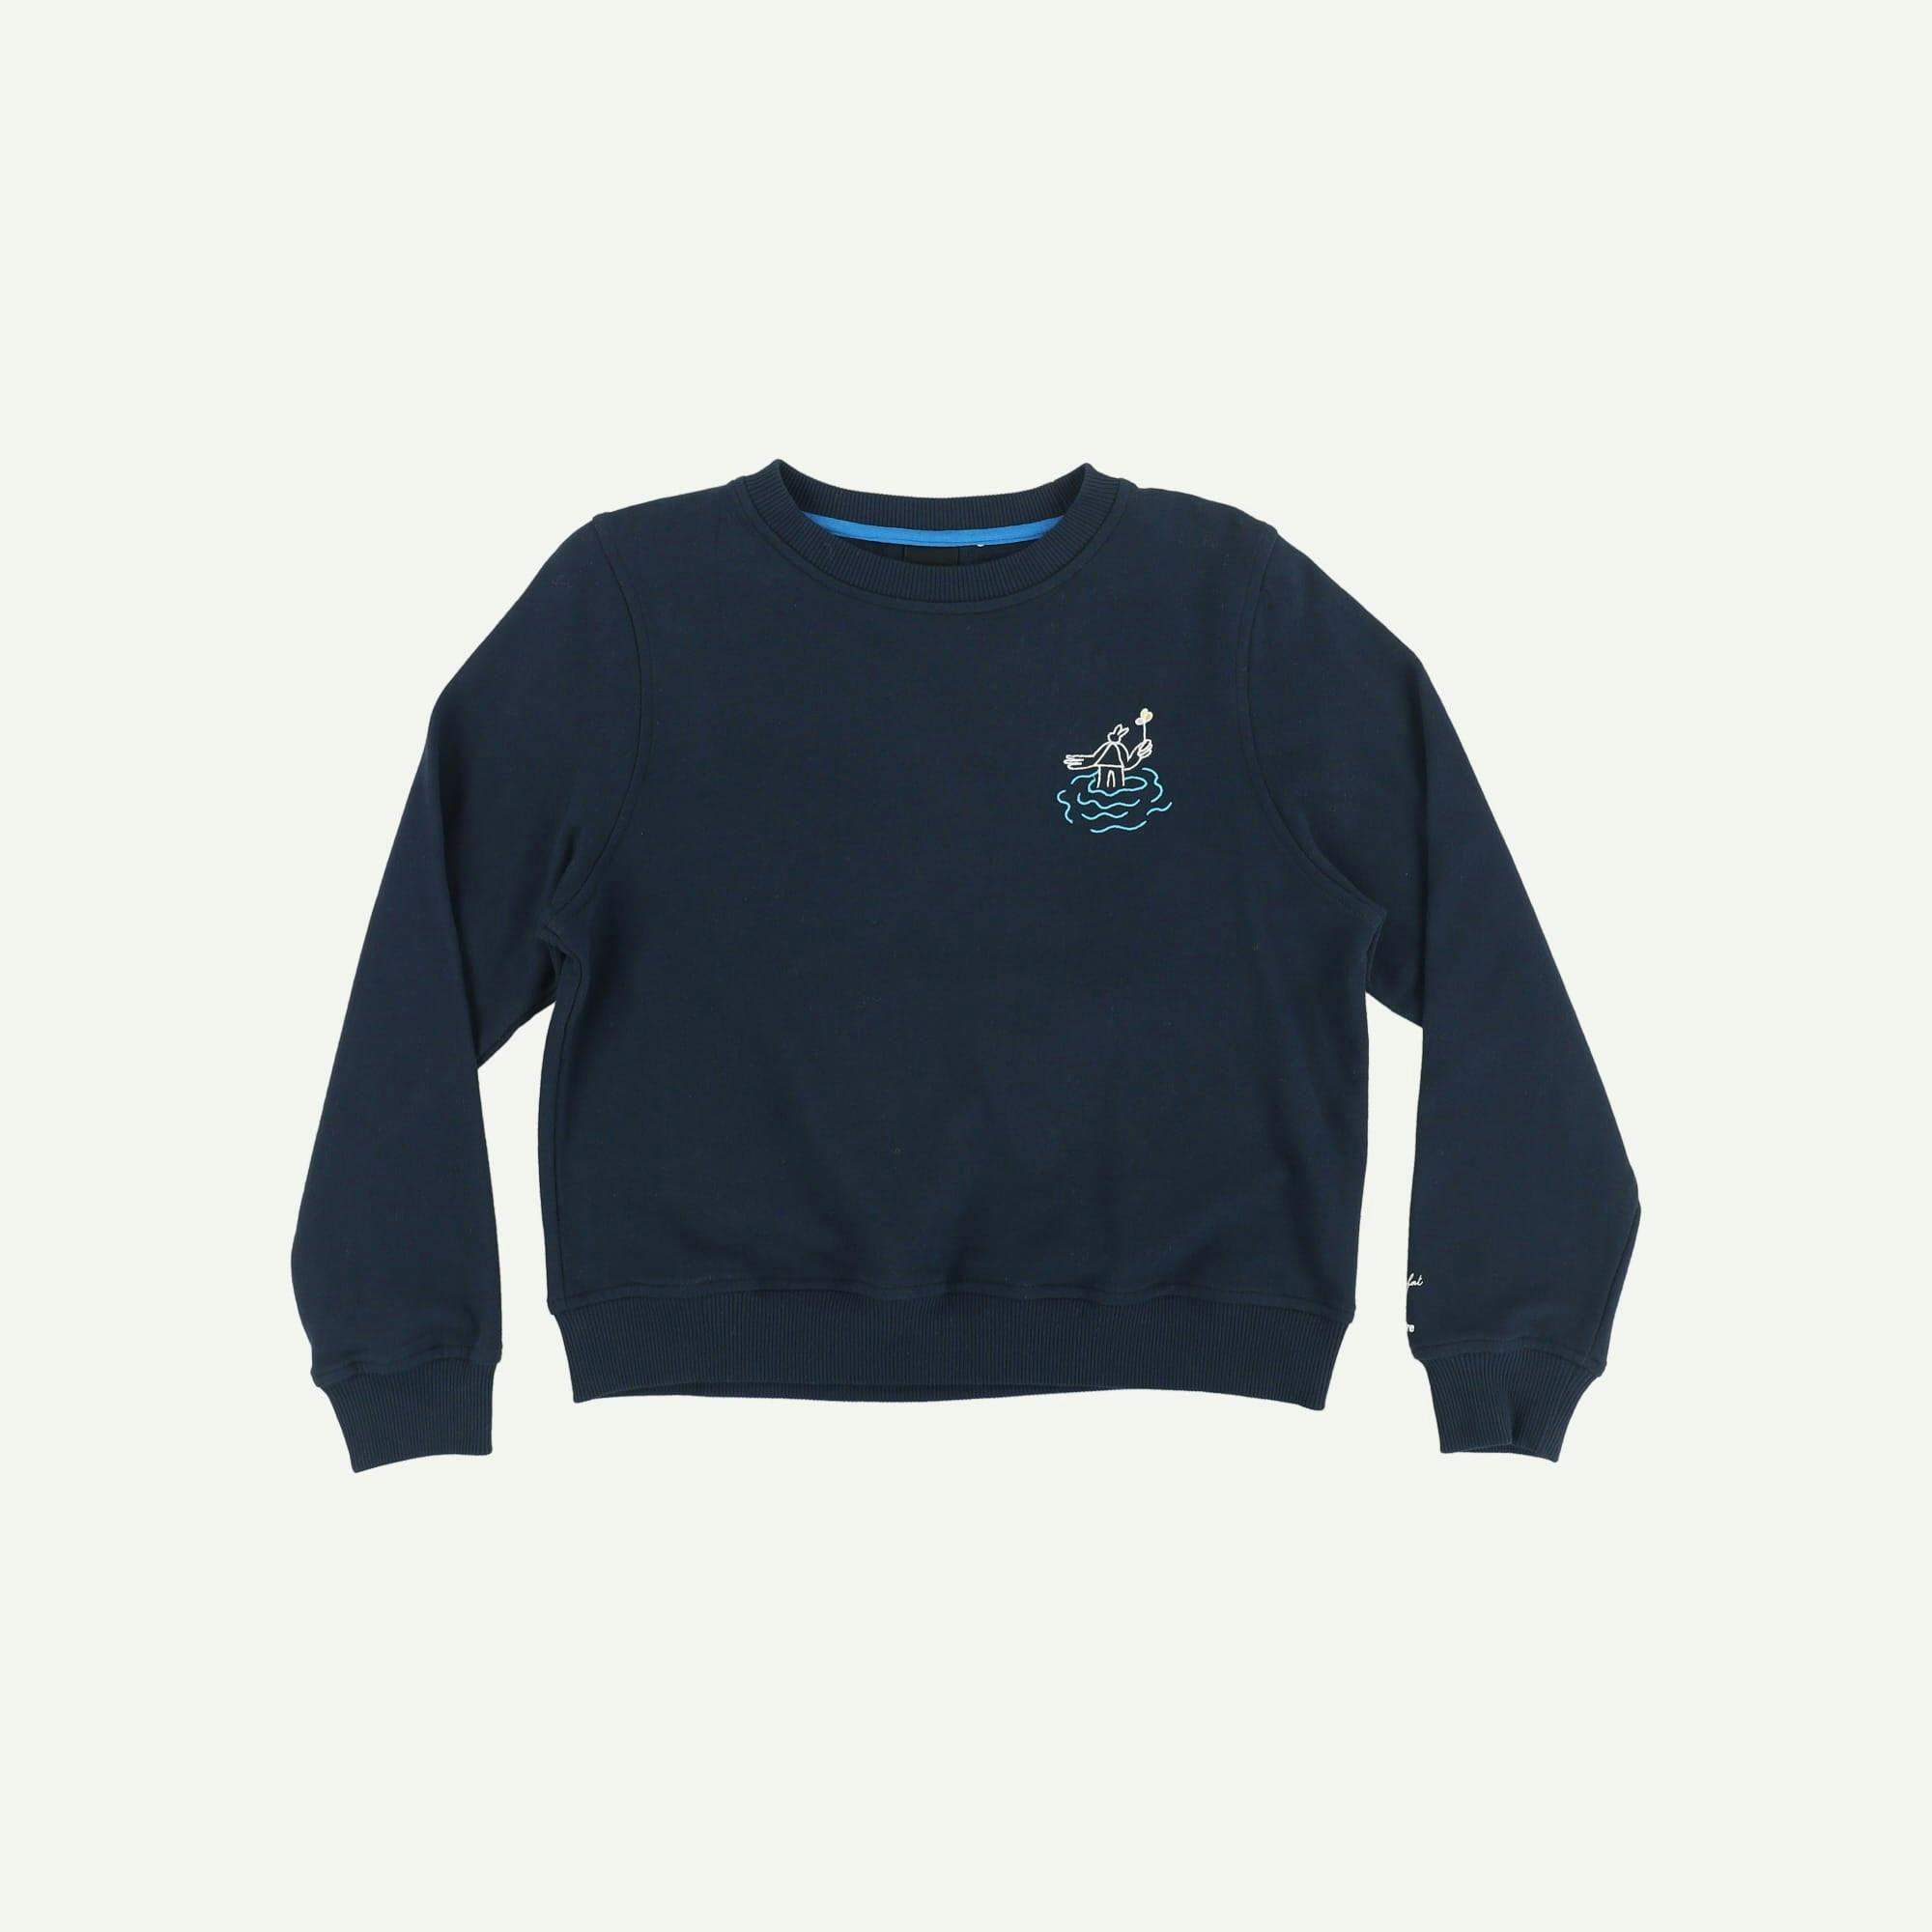 Finisterre As new Navy Sweatshirt